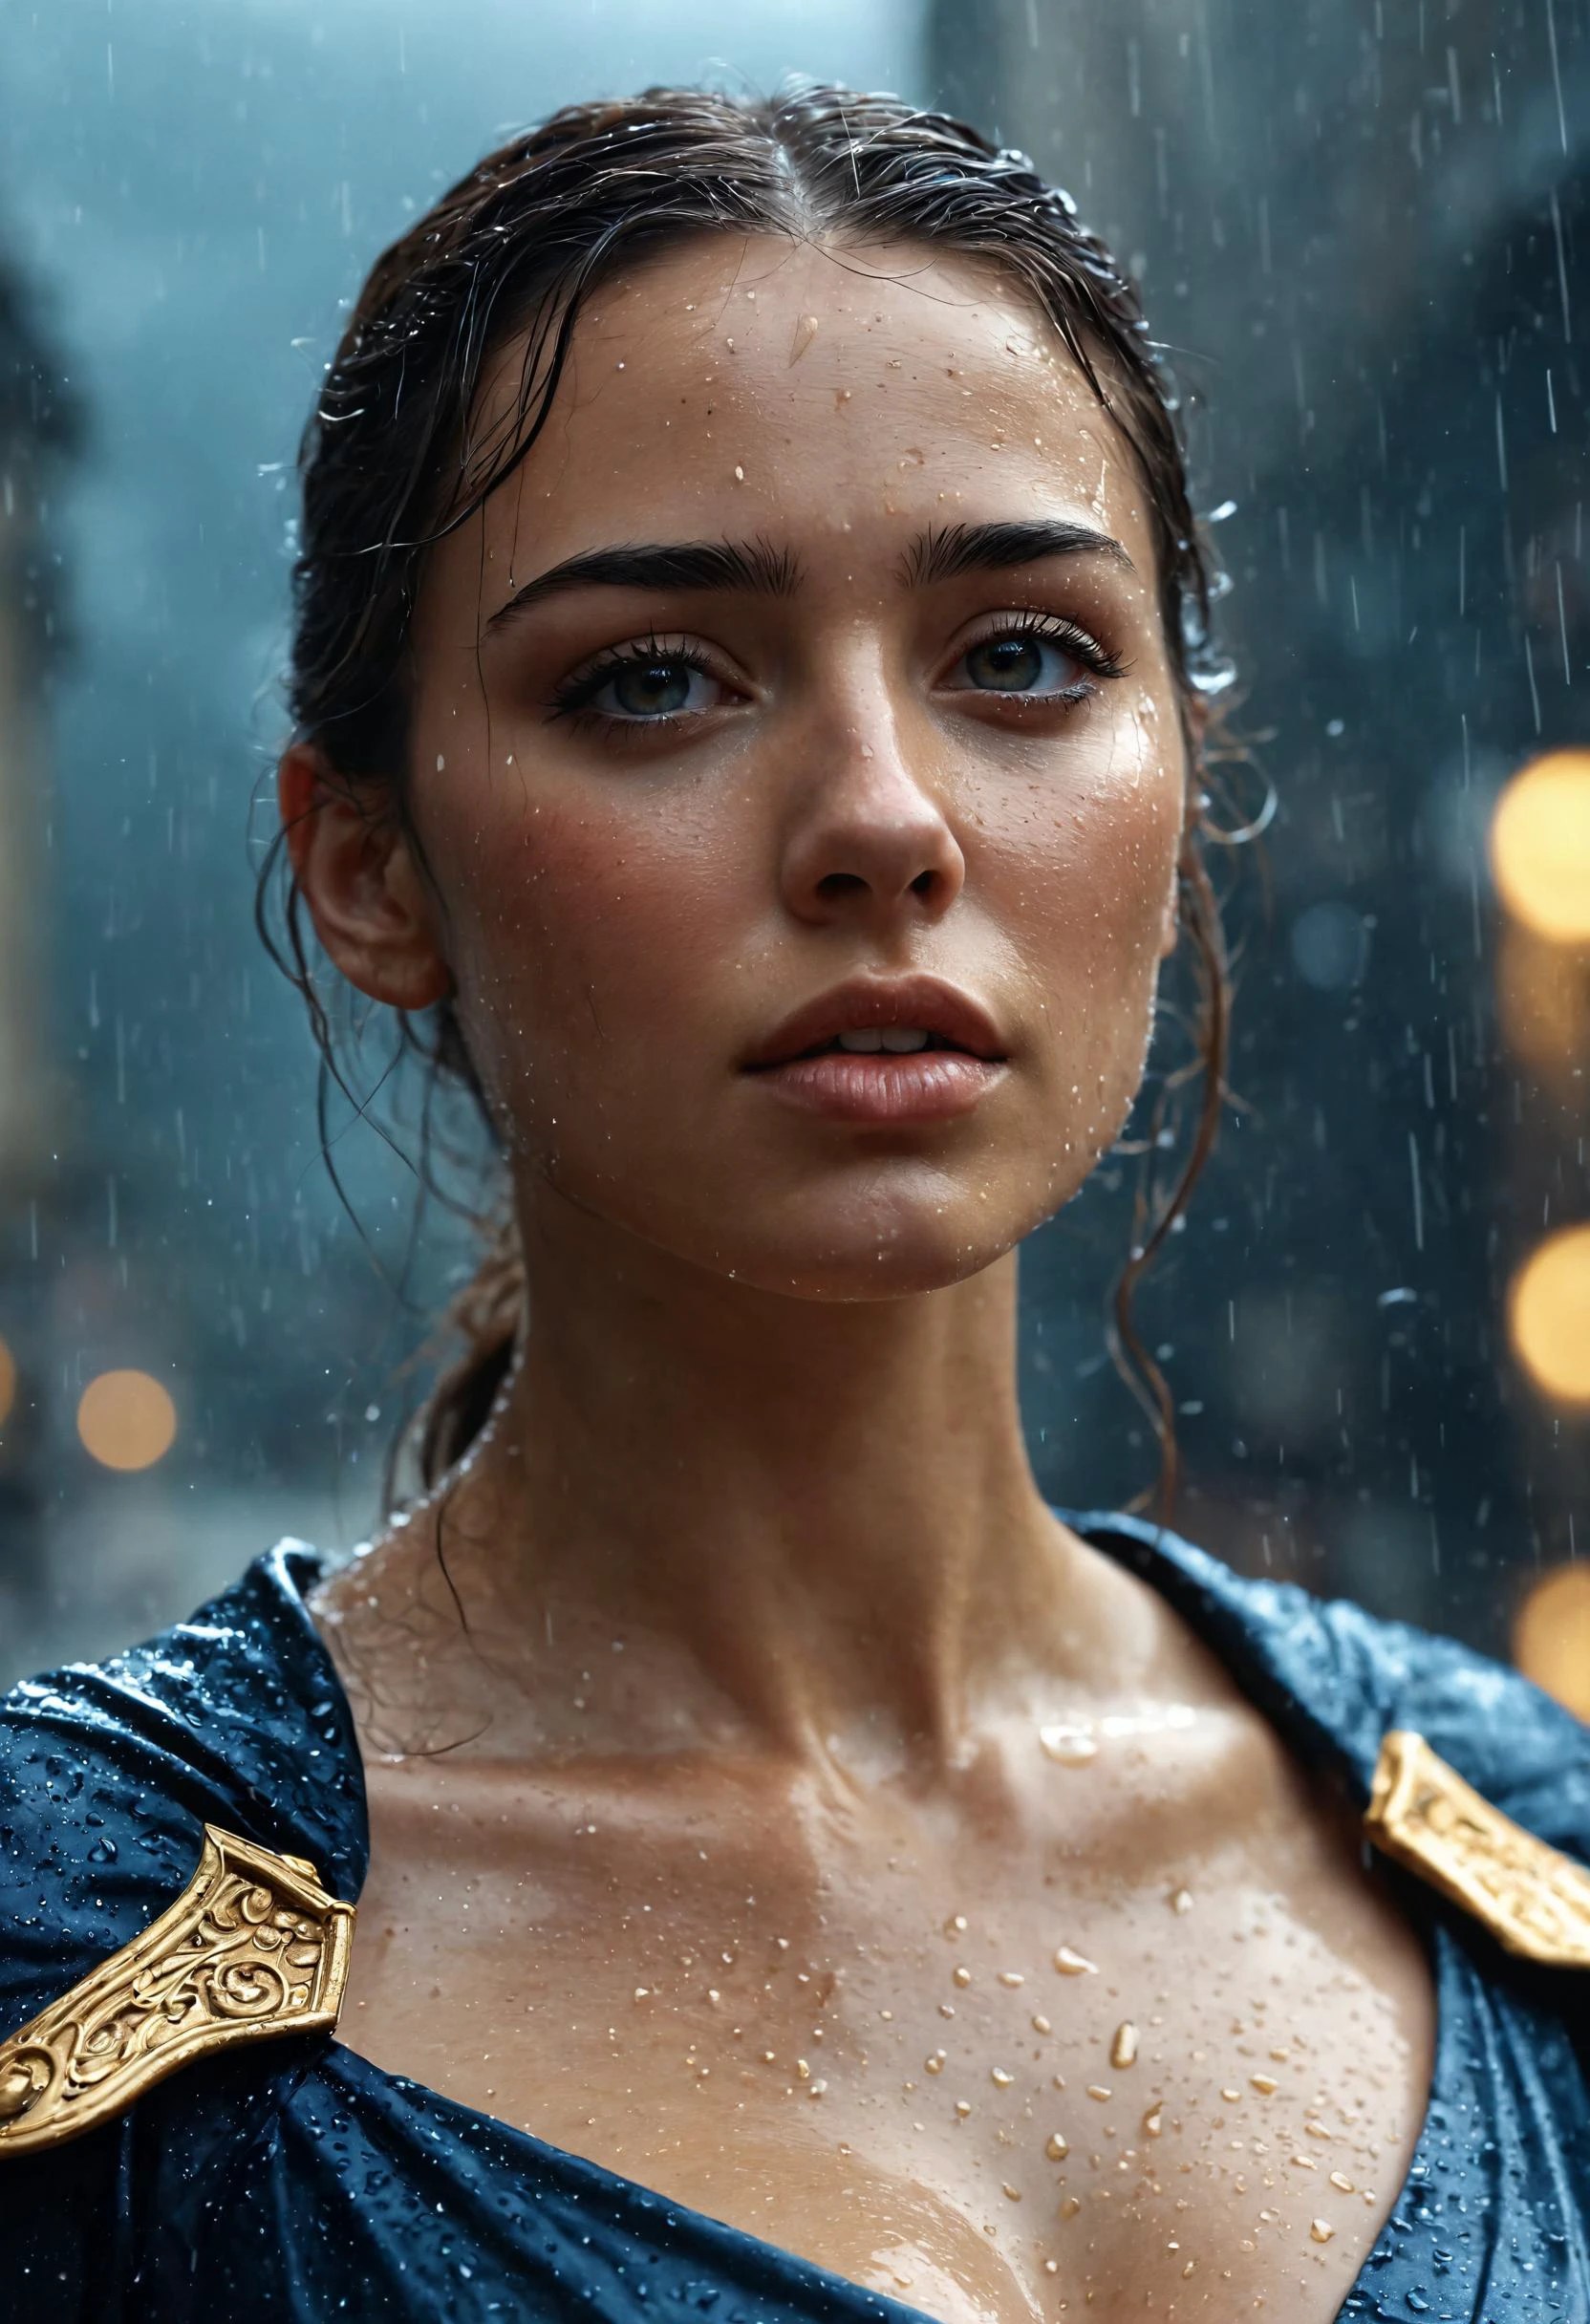 women with a focus face, black gold dress. standing in light rain. with realistic drop of rain on her. detailed character illustrations, extremely beautiful, intricate, epic composition, magical atmosphere, cinematic, highly saturated colors, inspired, very inspirational, original